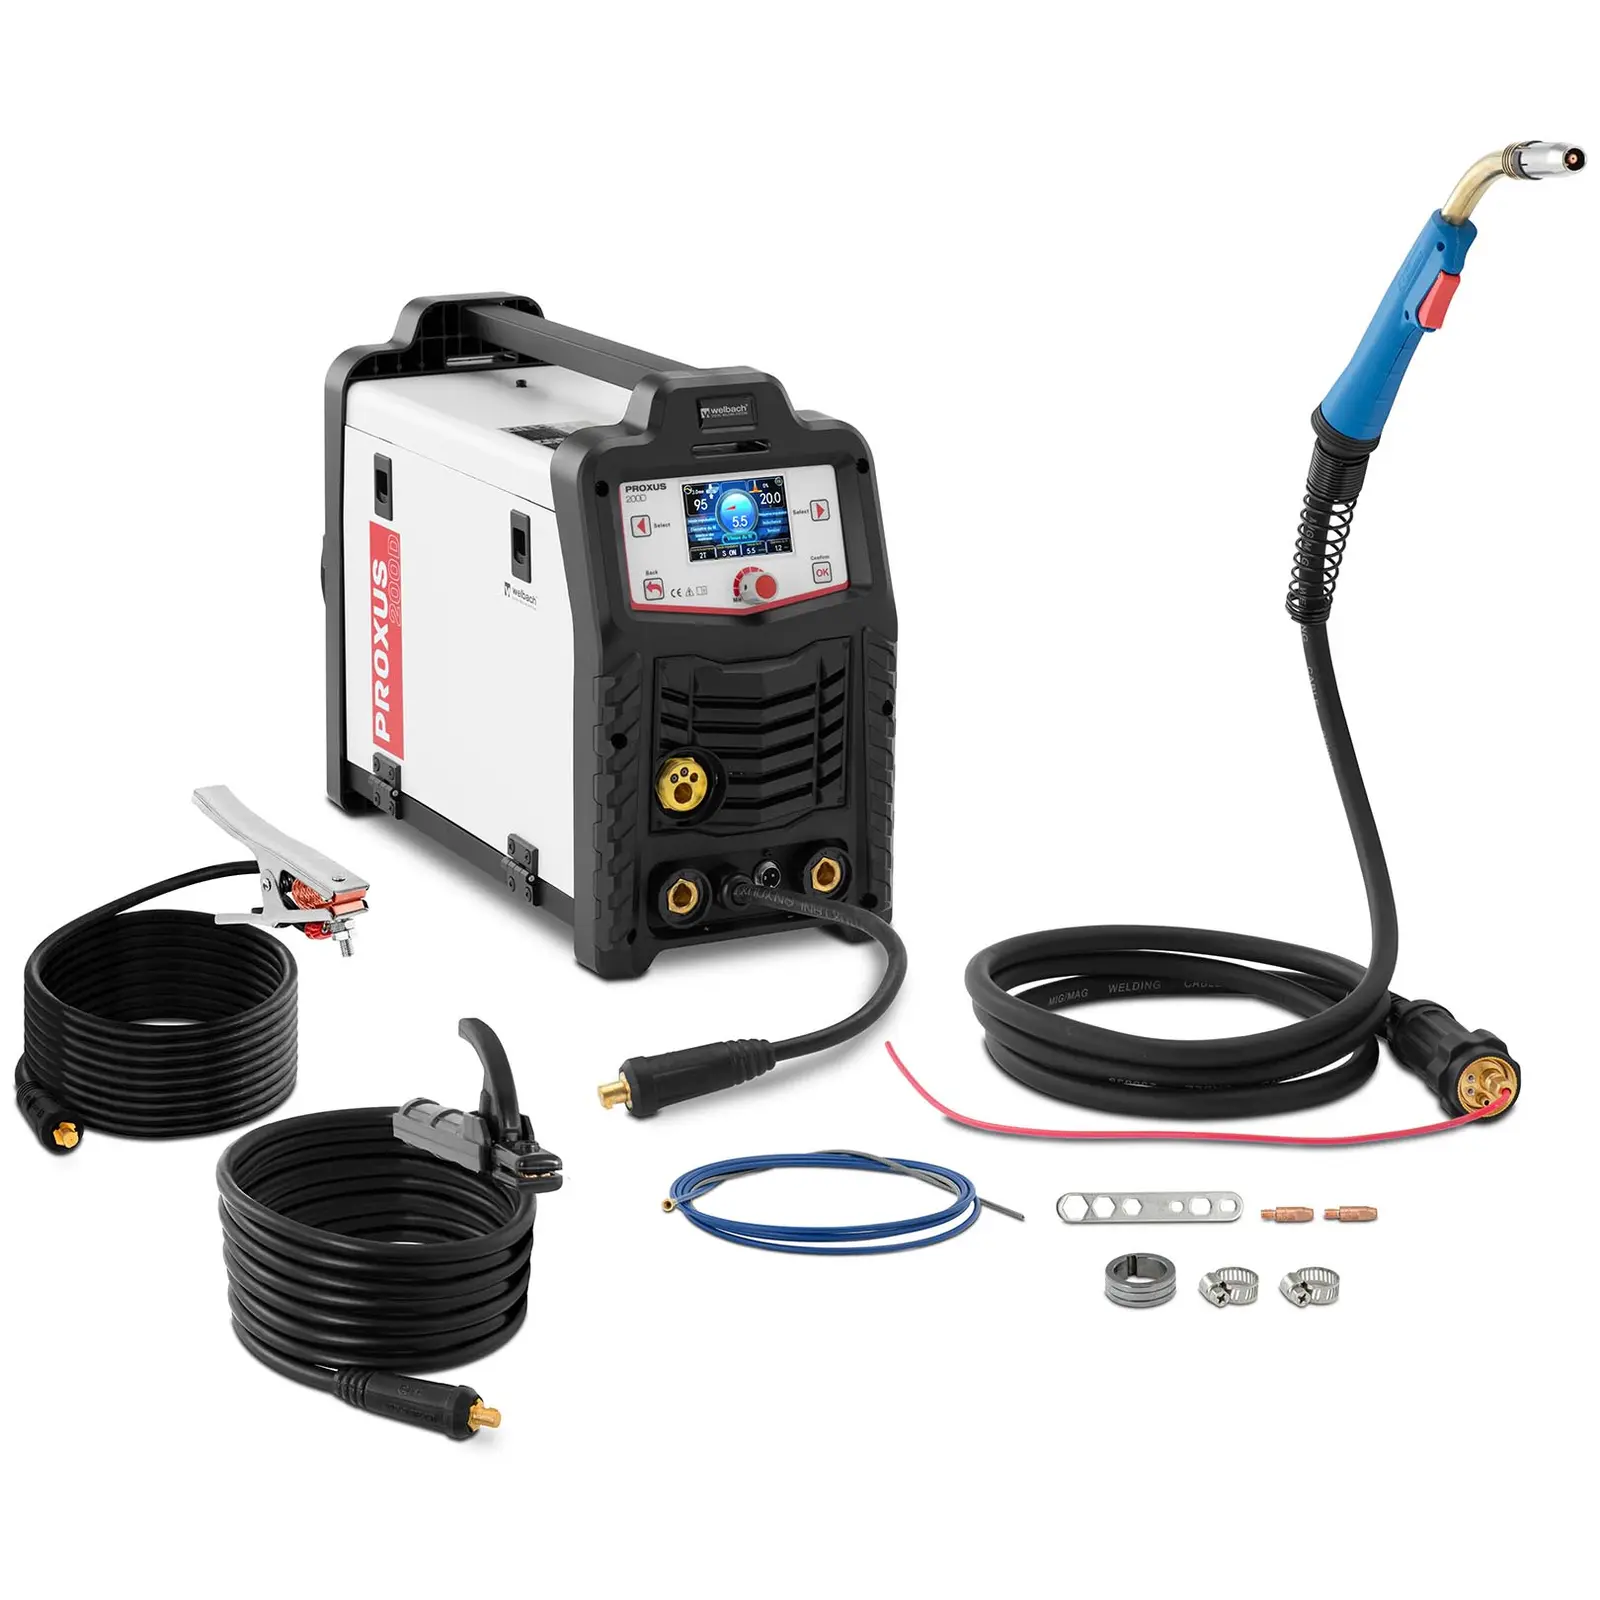 MIG/MAG welder - 200 A - Duty Cycle 100 % - LCD - Synergy - 230 V